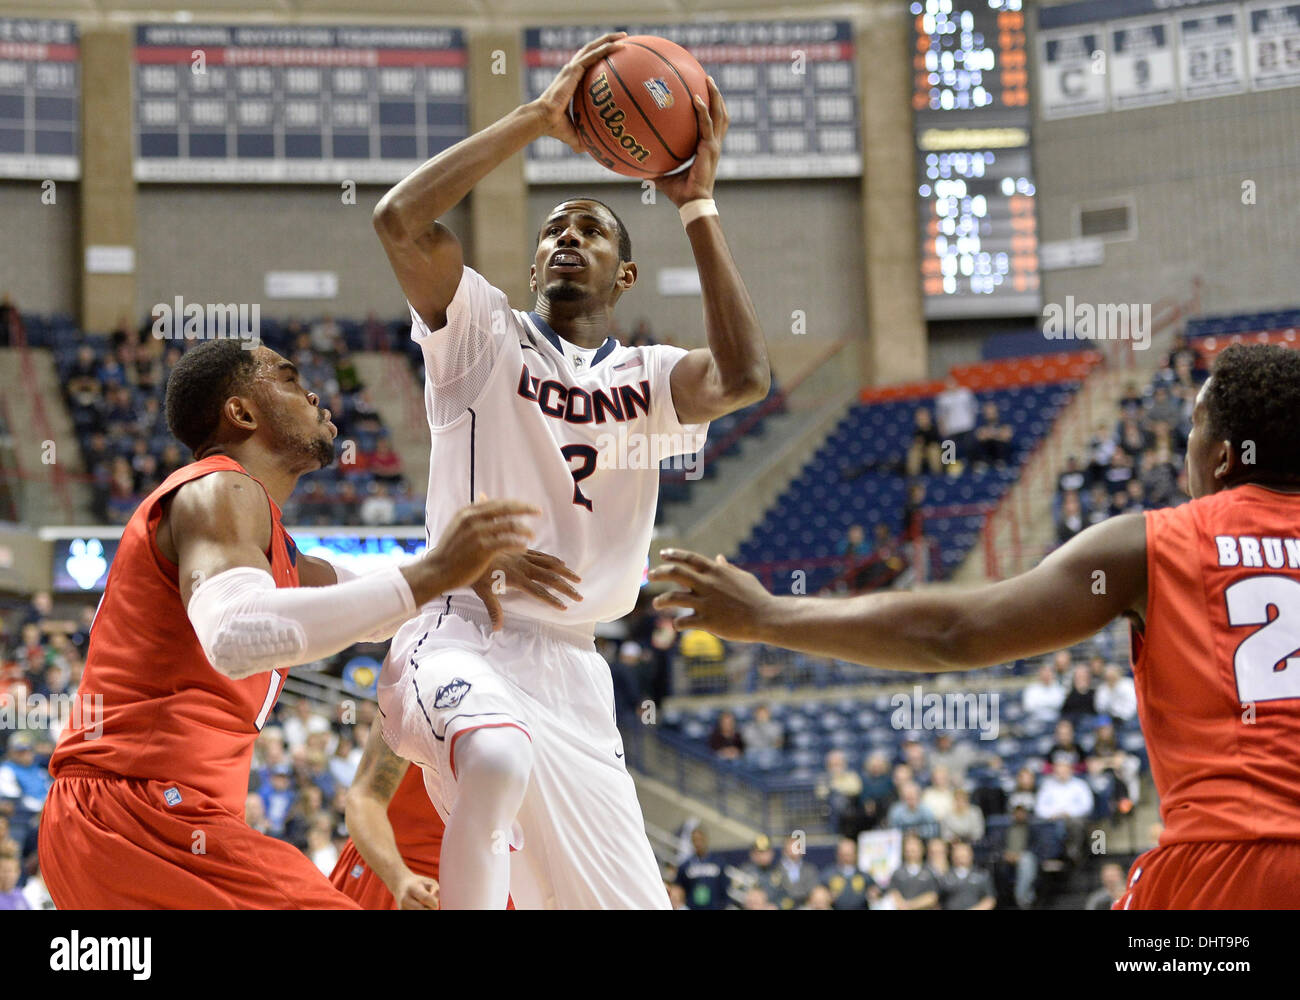 Storrs, CT, USA. 14th Nov, 2013. Thursday November 14, 2013: Connecticut Huskies forward DeAndre Daniels (2) drives to the basket against Detroit Titans center Ugochukwu Njoku (15) and Detroit Titans guard Carlton Brundidge (23) during the 1st half of the NCAA basketball game between Detroit and Connecticut at Gampel Pavilion in Storrs, CT. UConn went on to beat Detroit very easily 101-55. Bill Shettle / Cal Sport Media. Credit:  csm/Alamy Live News Stock Photo